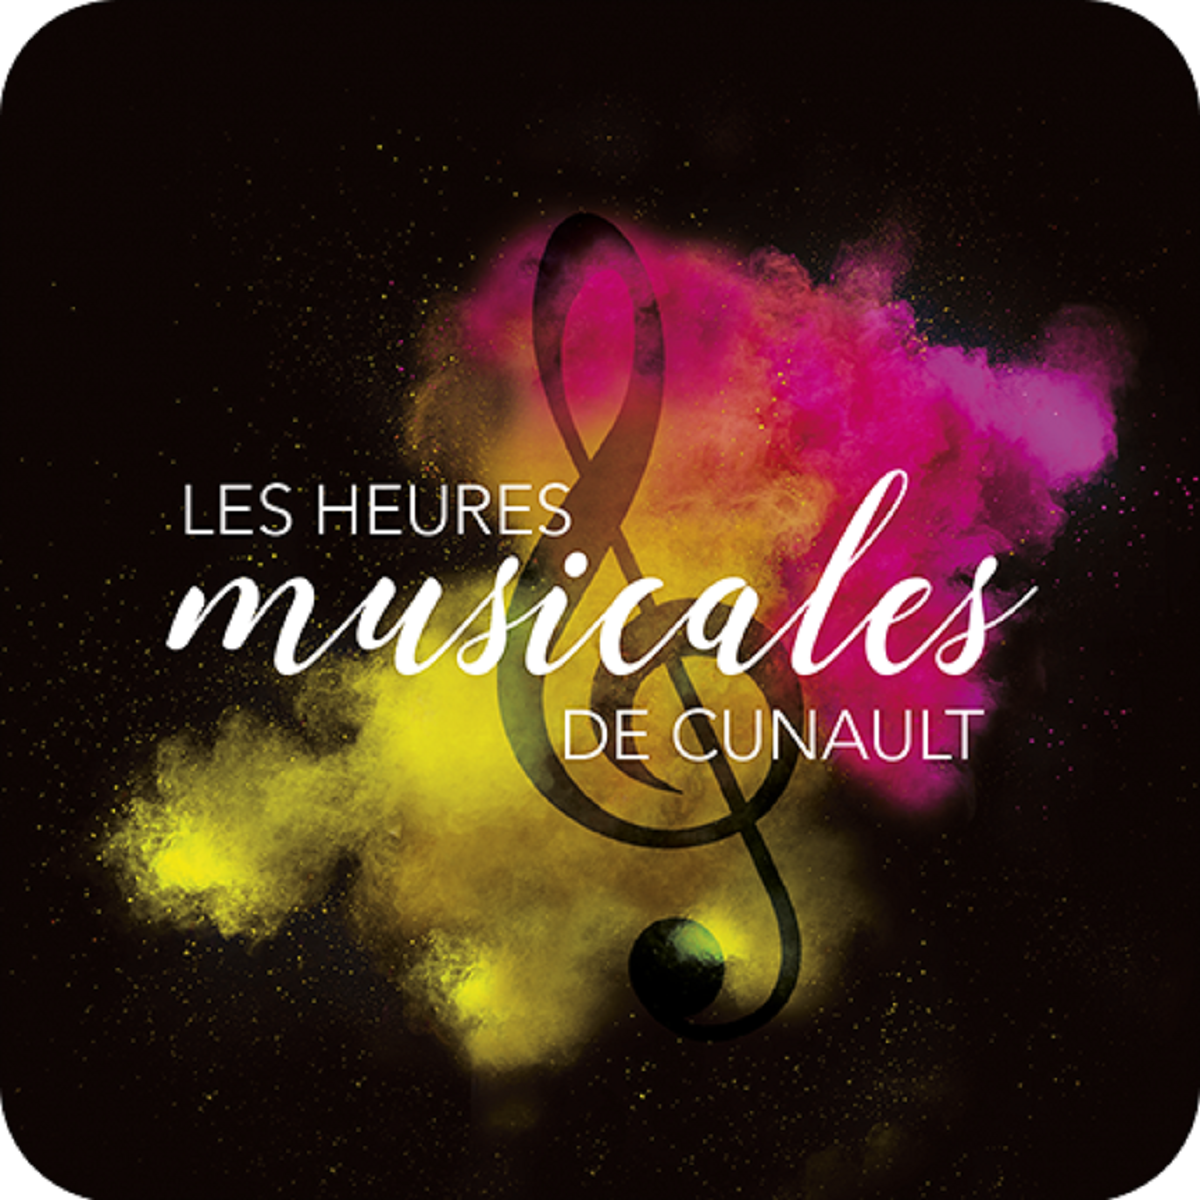 Les Heures Musicales de Cunault cover image